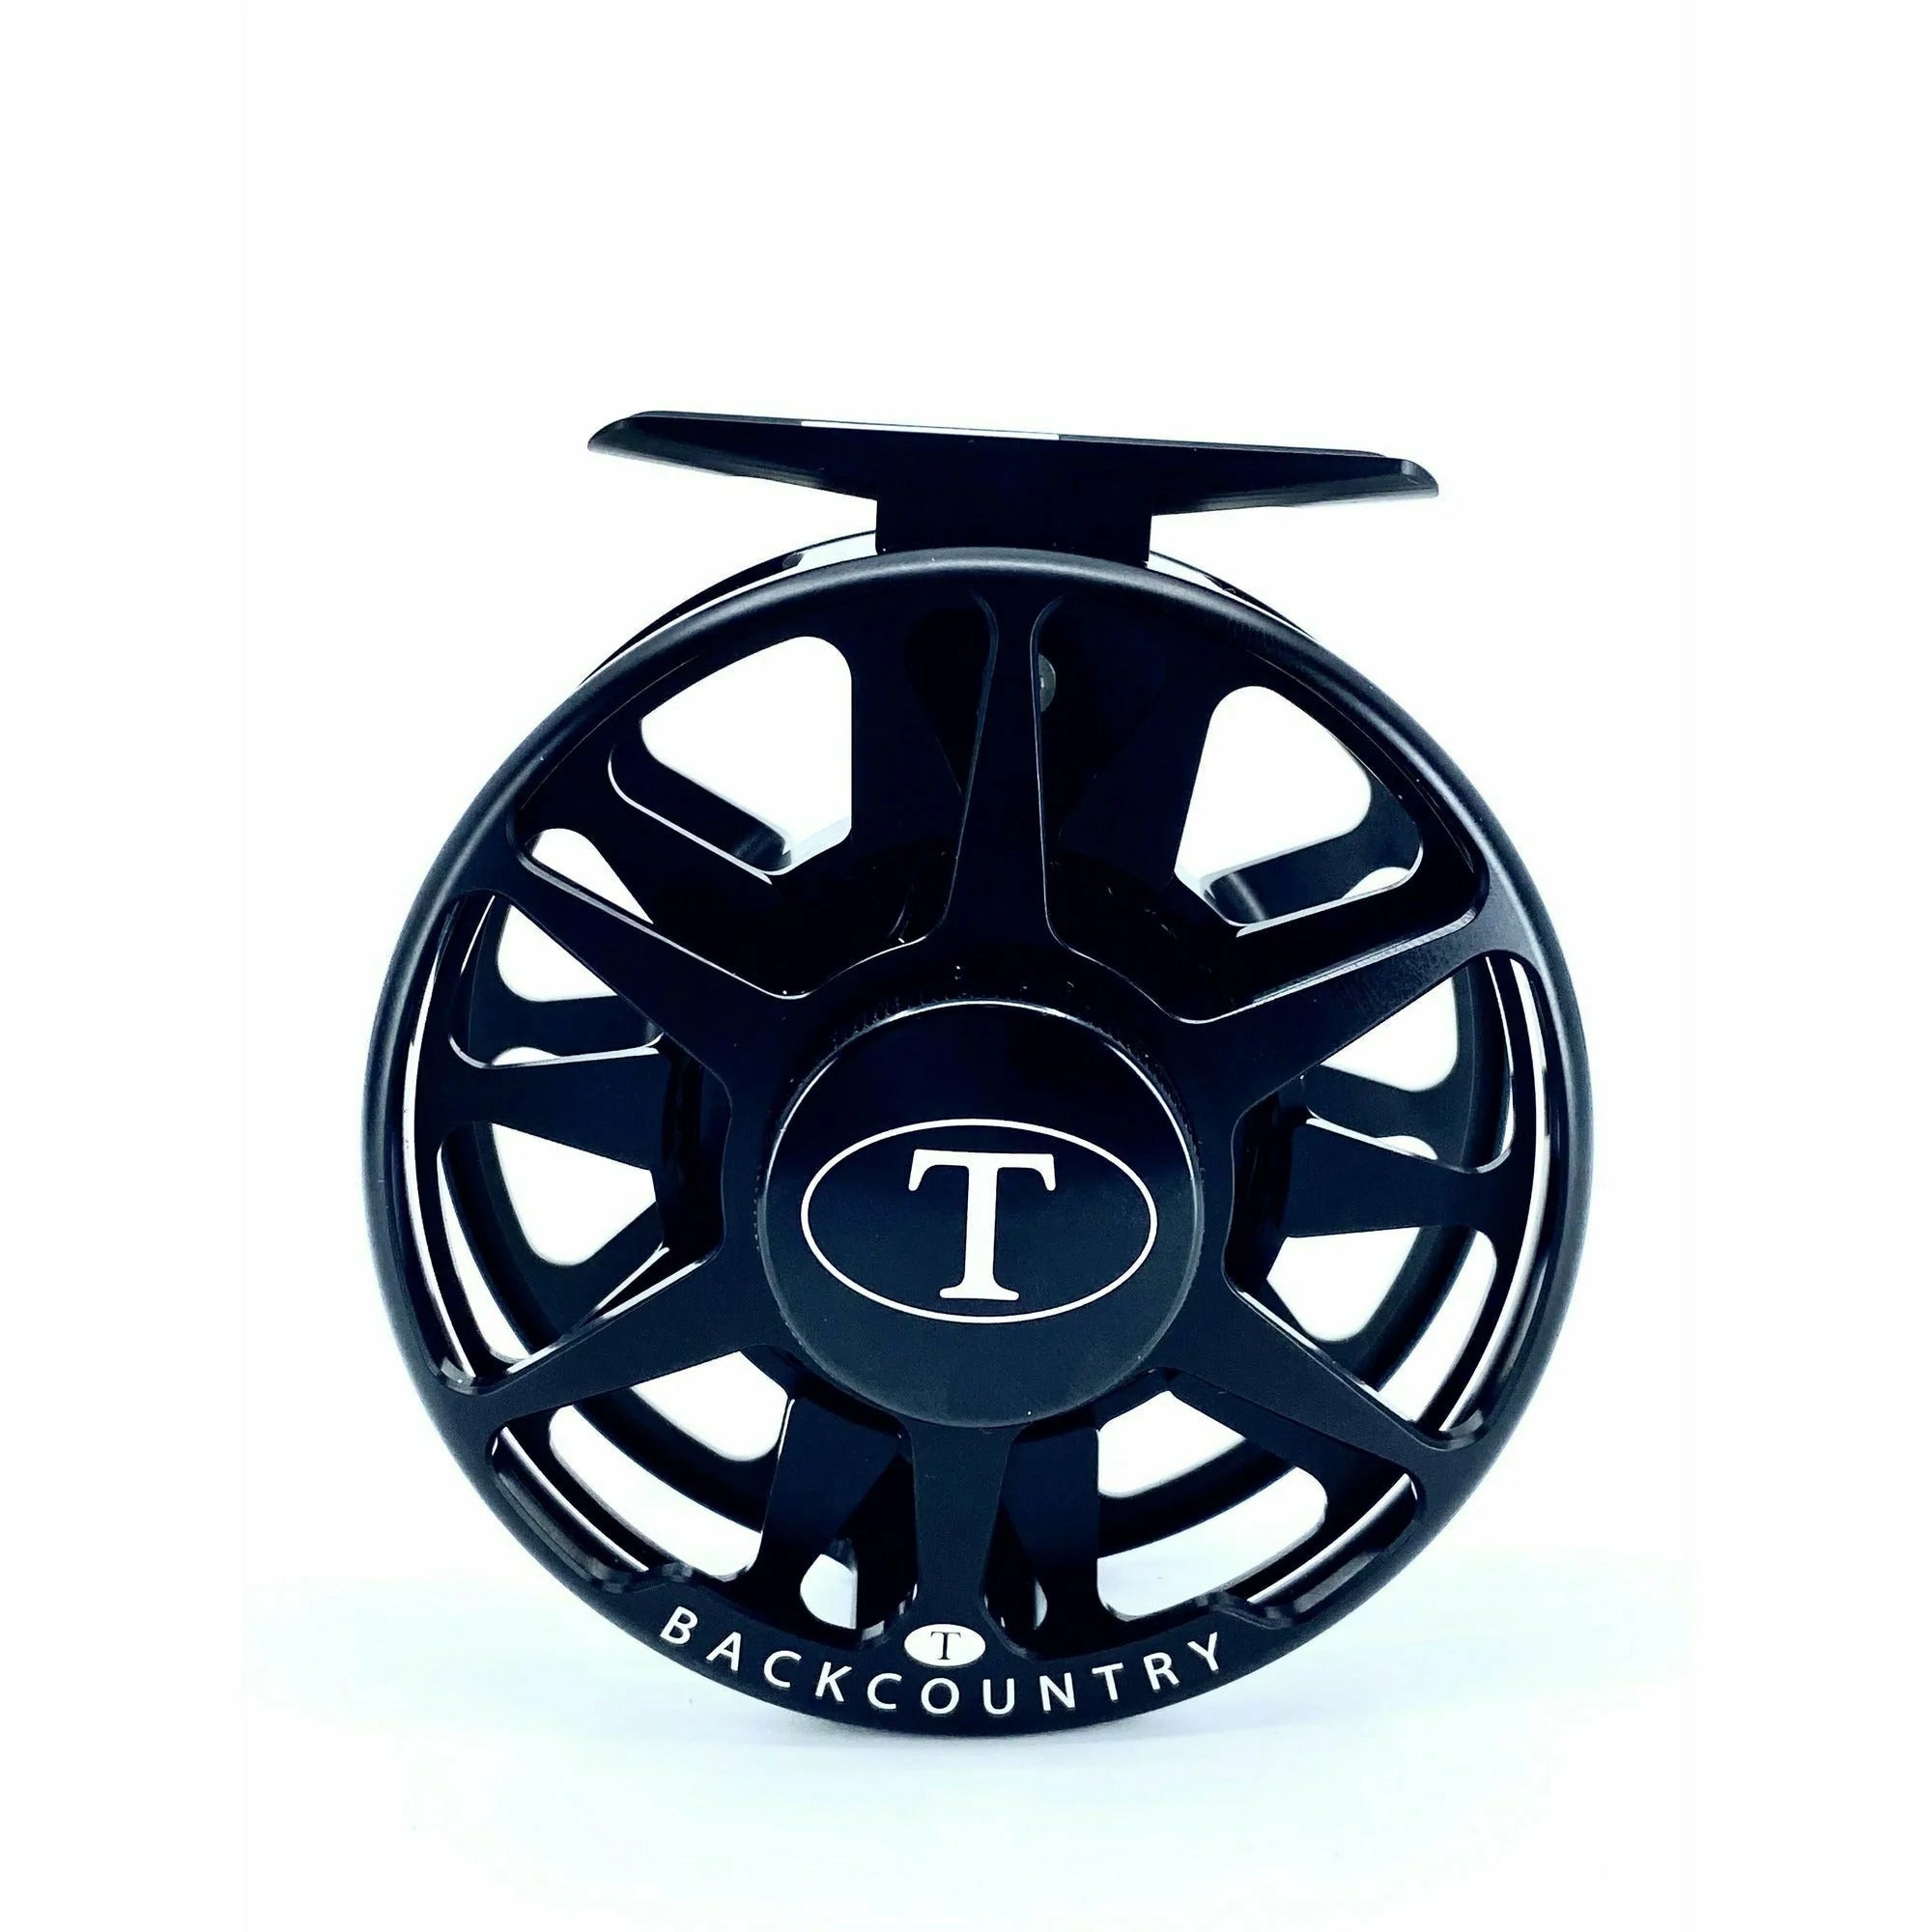 Tibor NEW Backcountry fly reel with T on the drag knob